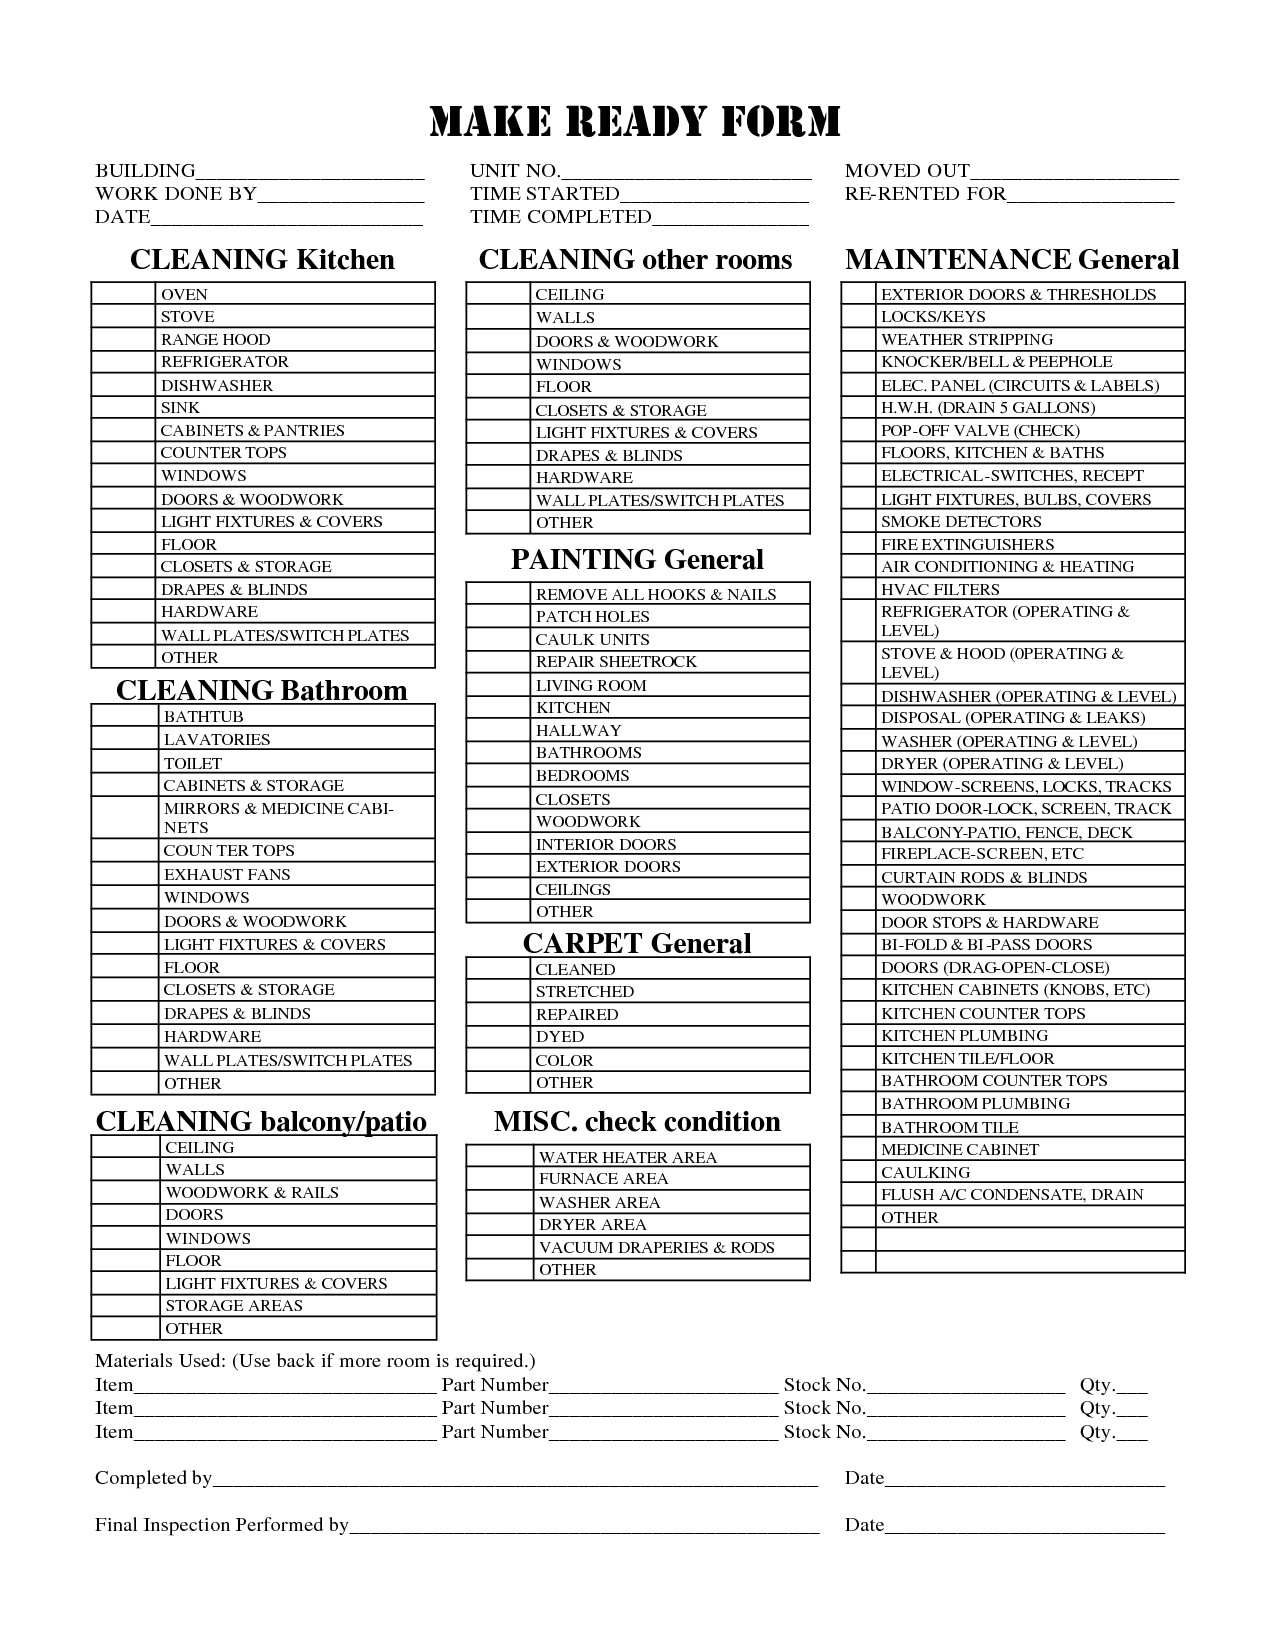 Apartment Maintenance Checklist Template Check List for Apartment Make Ready Google Search